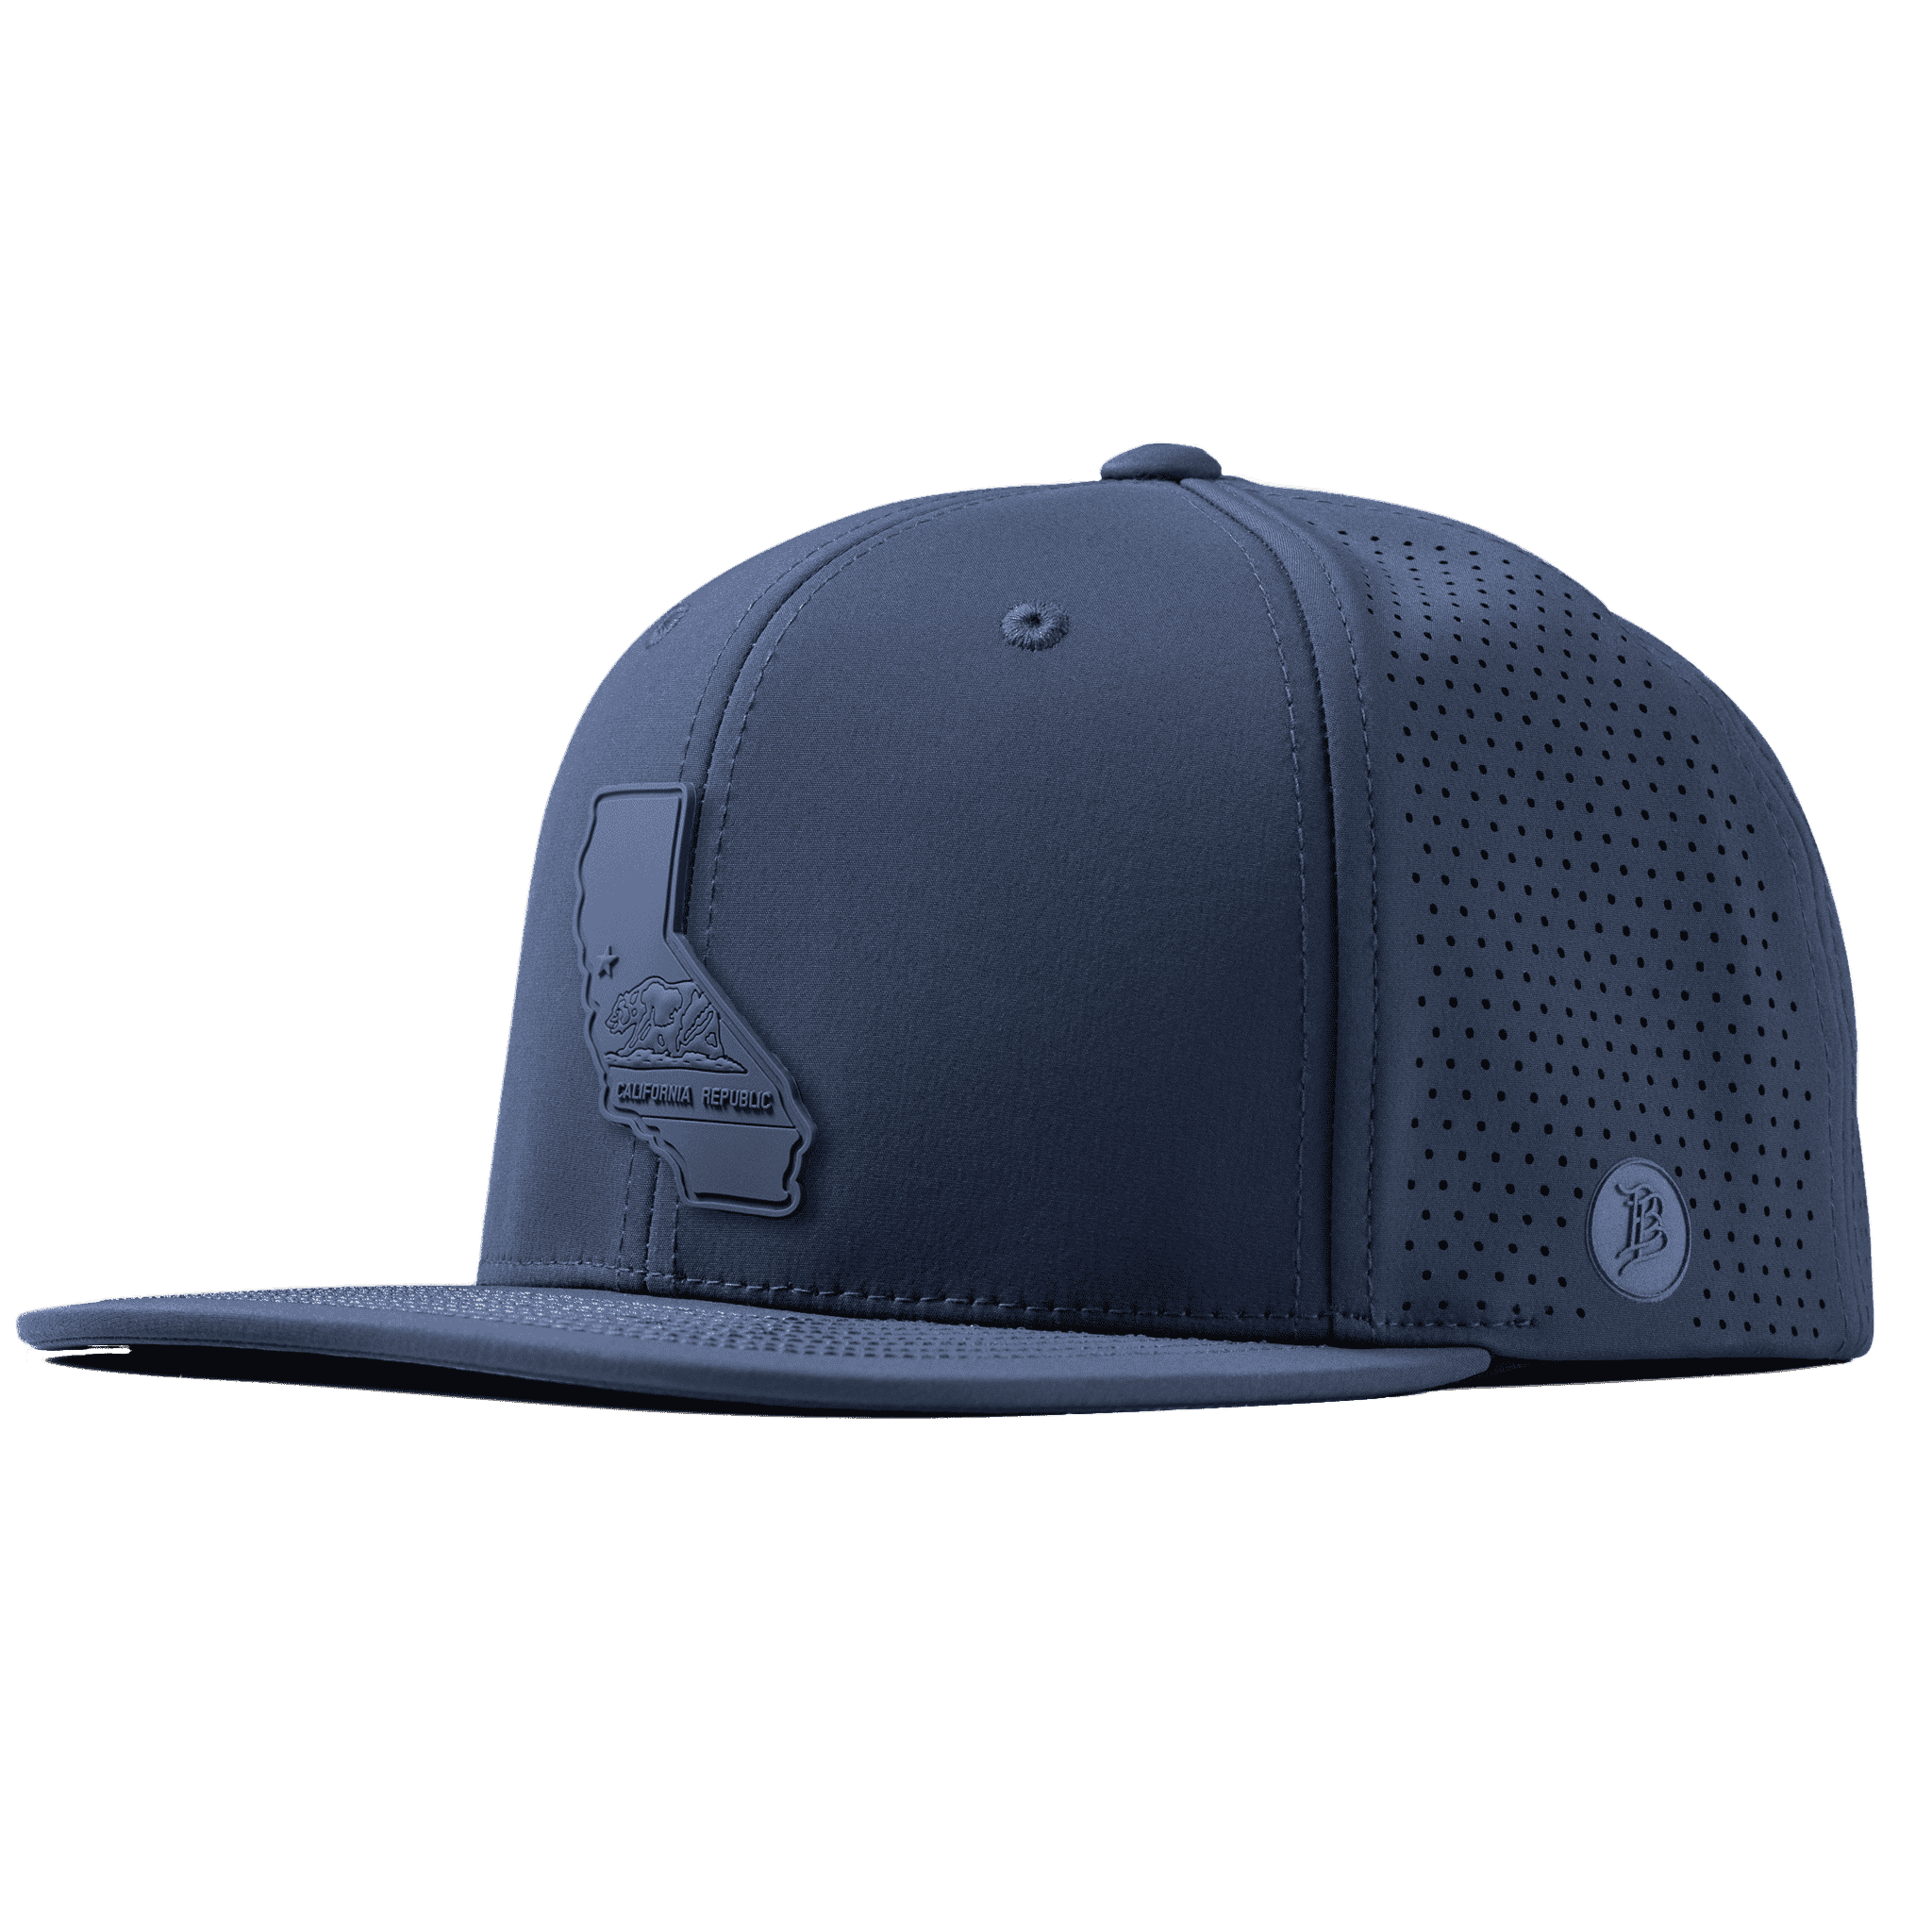 Stealth Mode Hat - Stealth Series